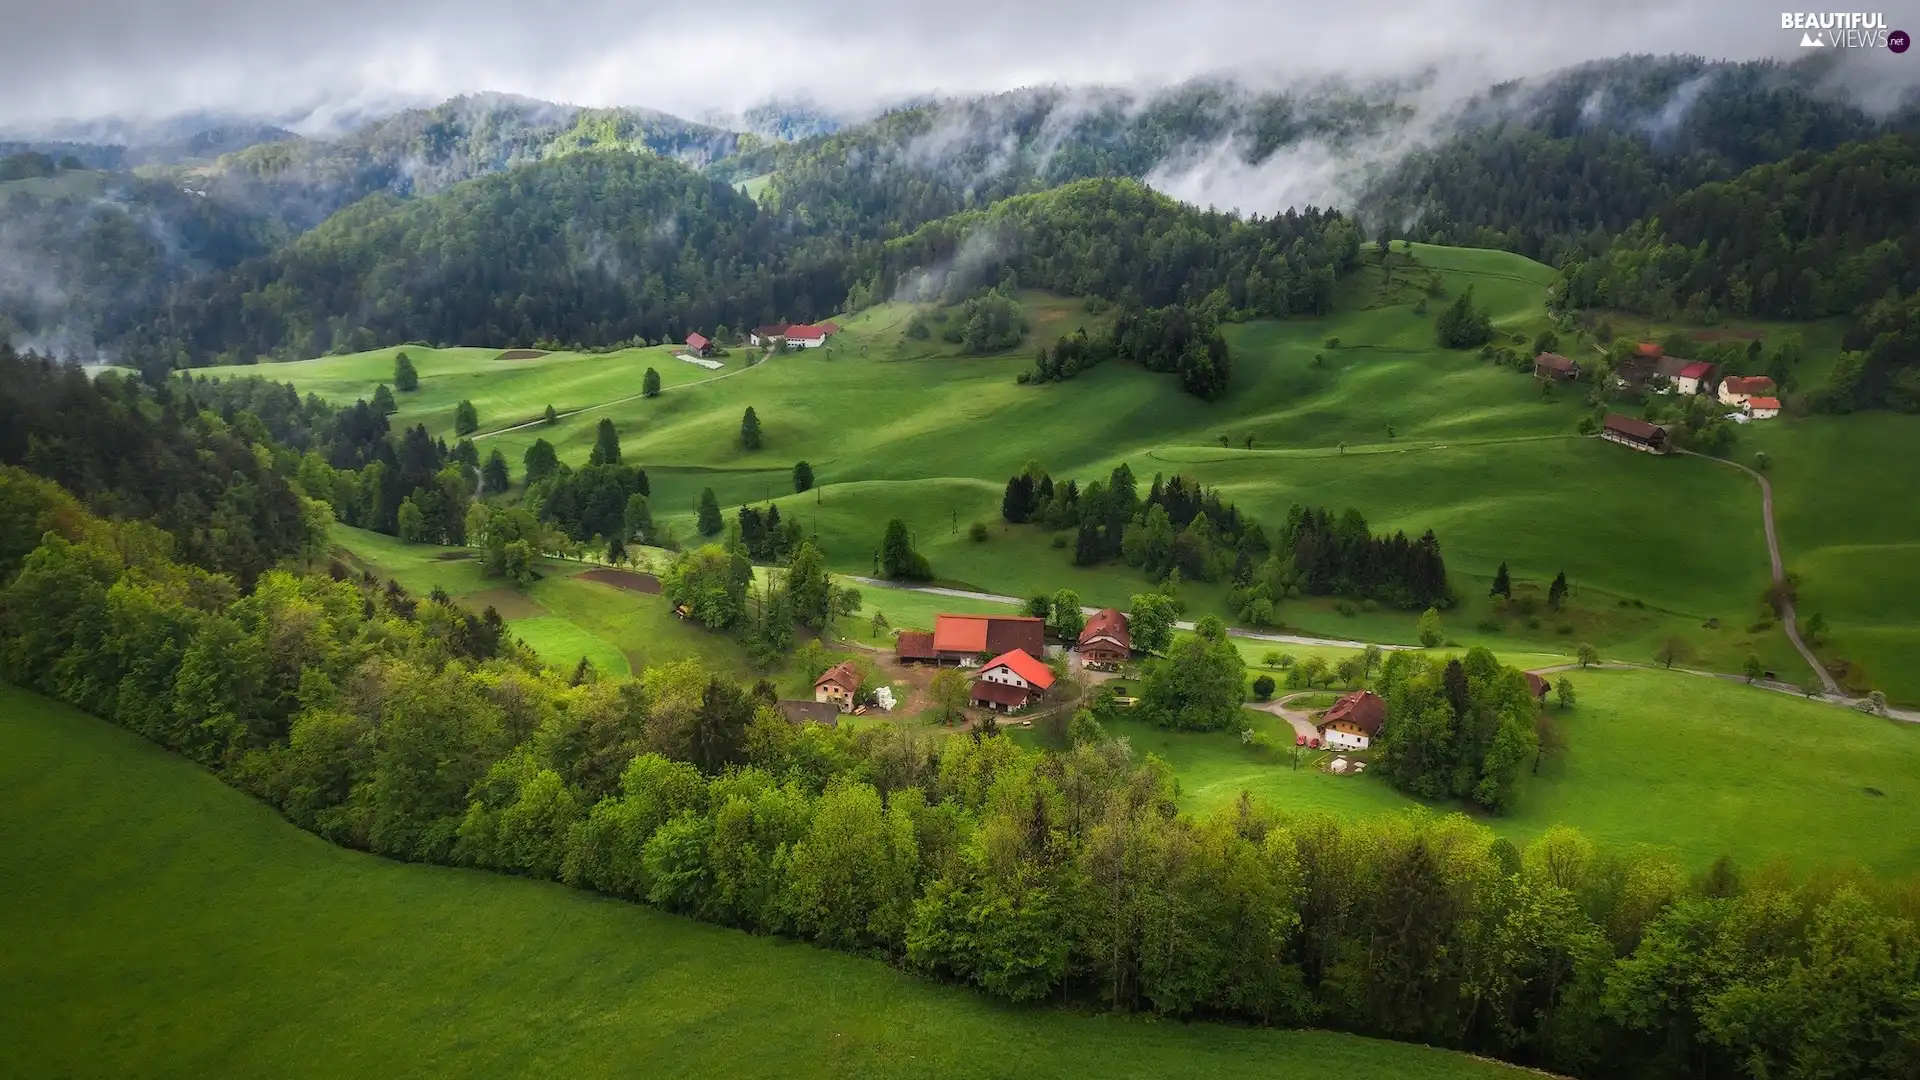 The Hills, Mountains, woods, trees, Houses, medows, Fog, Valley, viewes